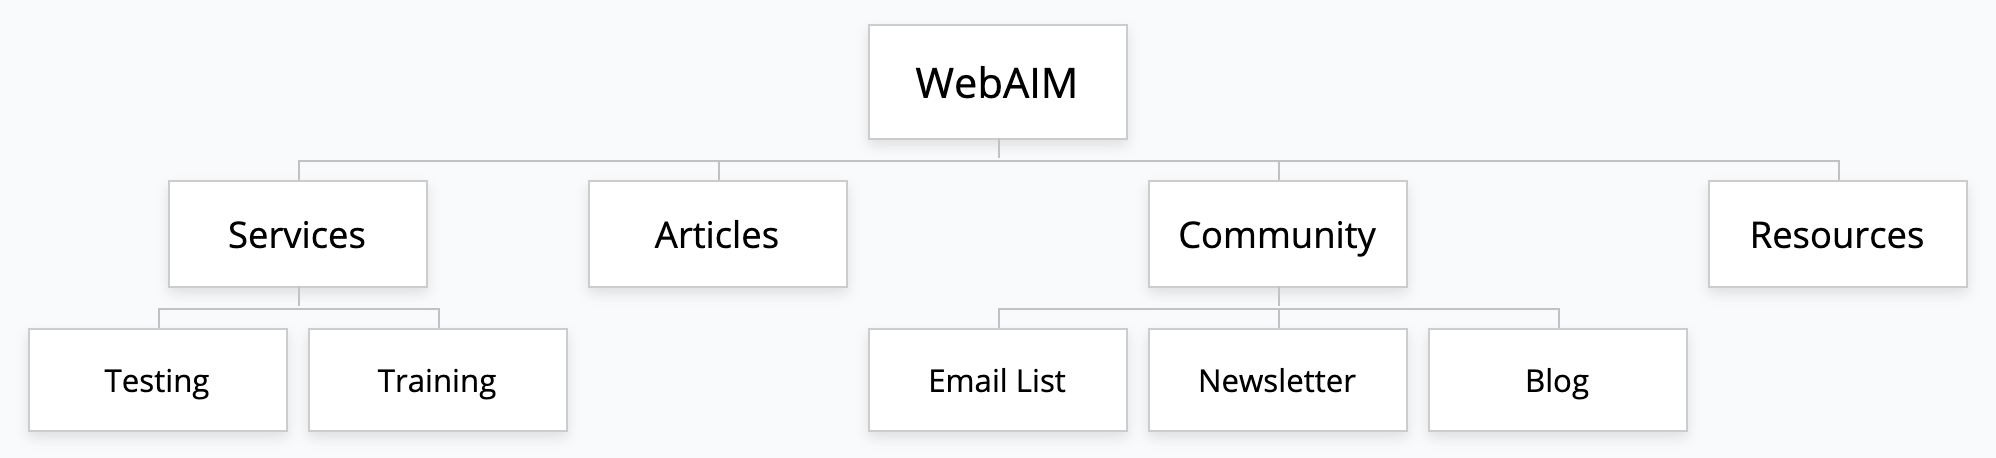 Screenshot of visual site map - the top level is WebAIM, with 4 levels beneath it (Services, Articles, Community, and Resources). Services and Community have sublevels below them.